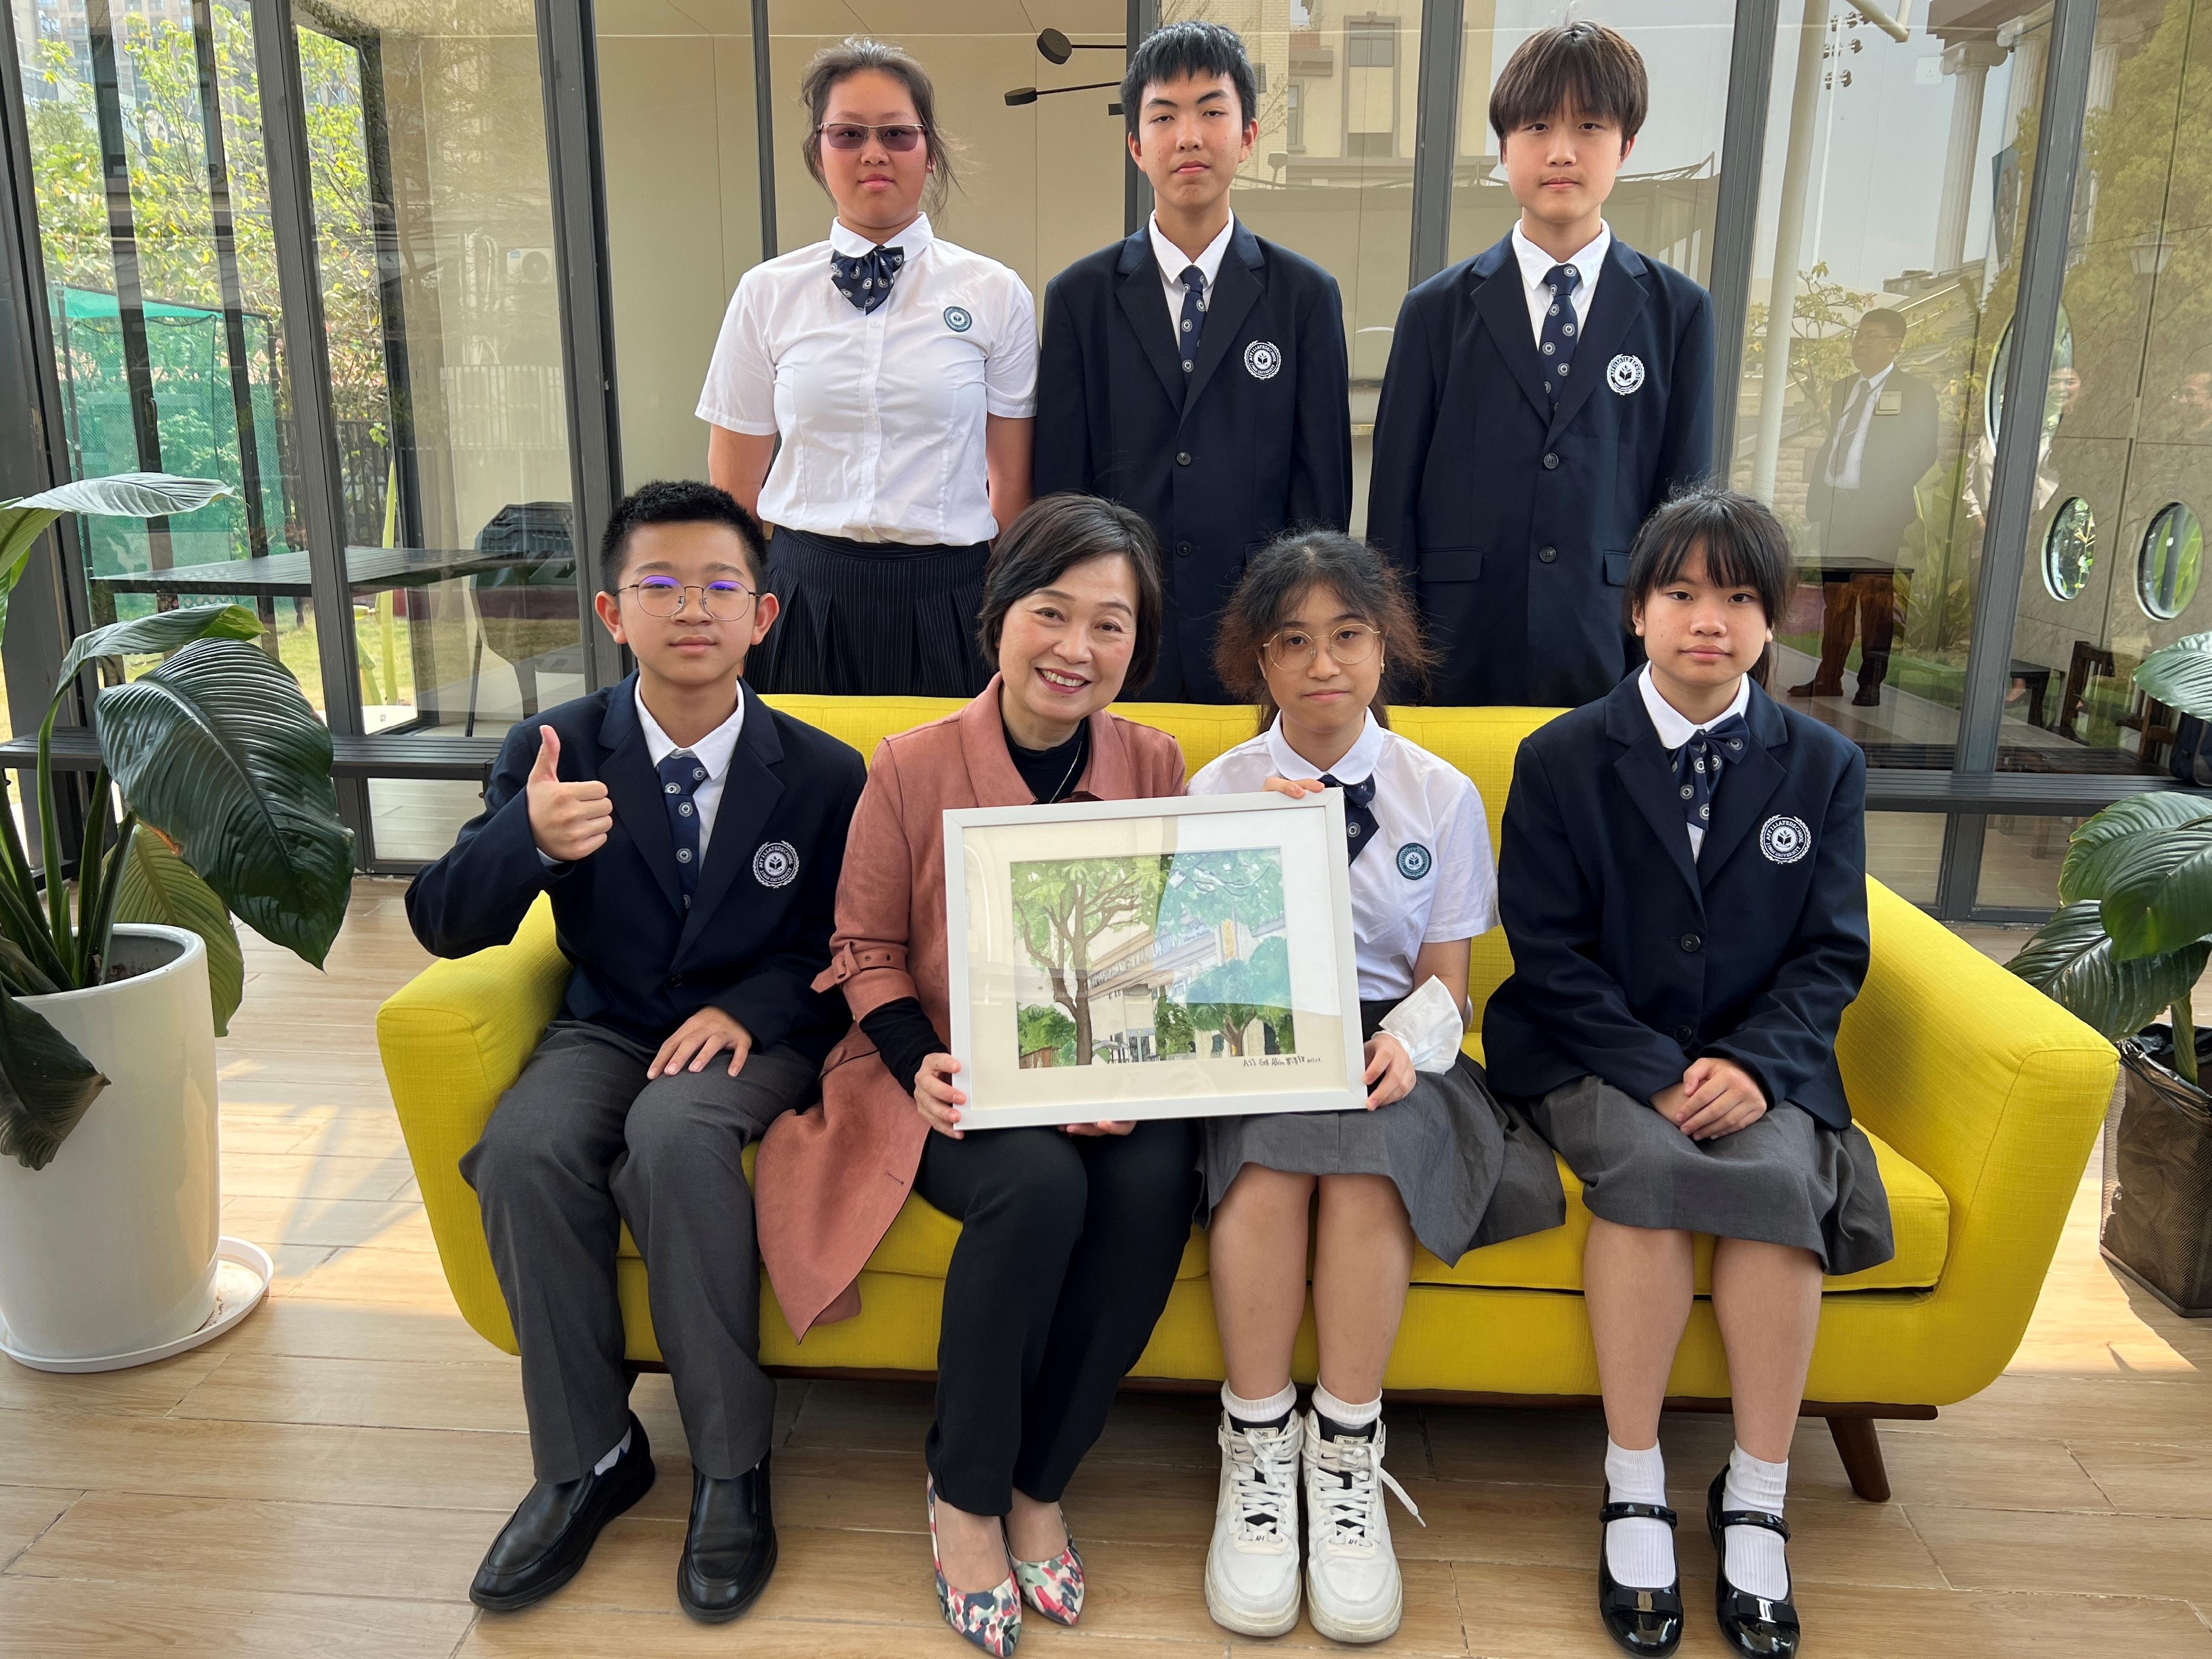 The Secretary for Education, Dr Choi Yuk-lin, today (March 8) visited the Affiliated School of JNU for Hong Kong and Macao Students in Dongguan to understand more about the study situation of children of Hong Kong people on the Mainland. Photo shows Dr Choi (front row, second left) receiving a souvenir from students of the school.